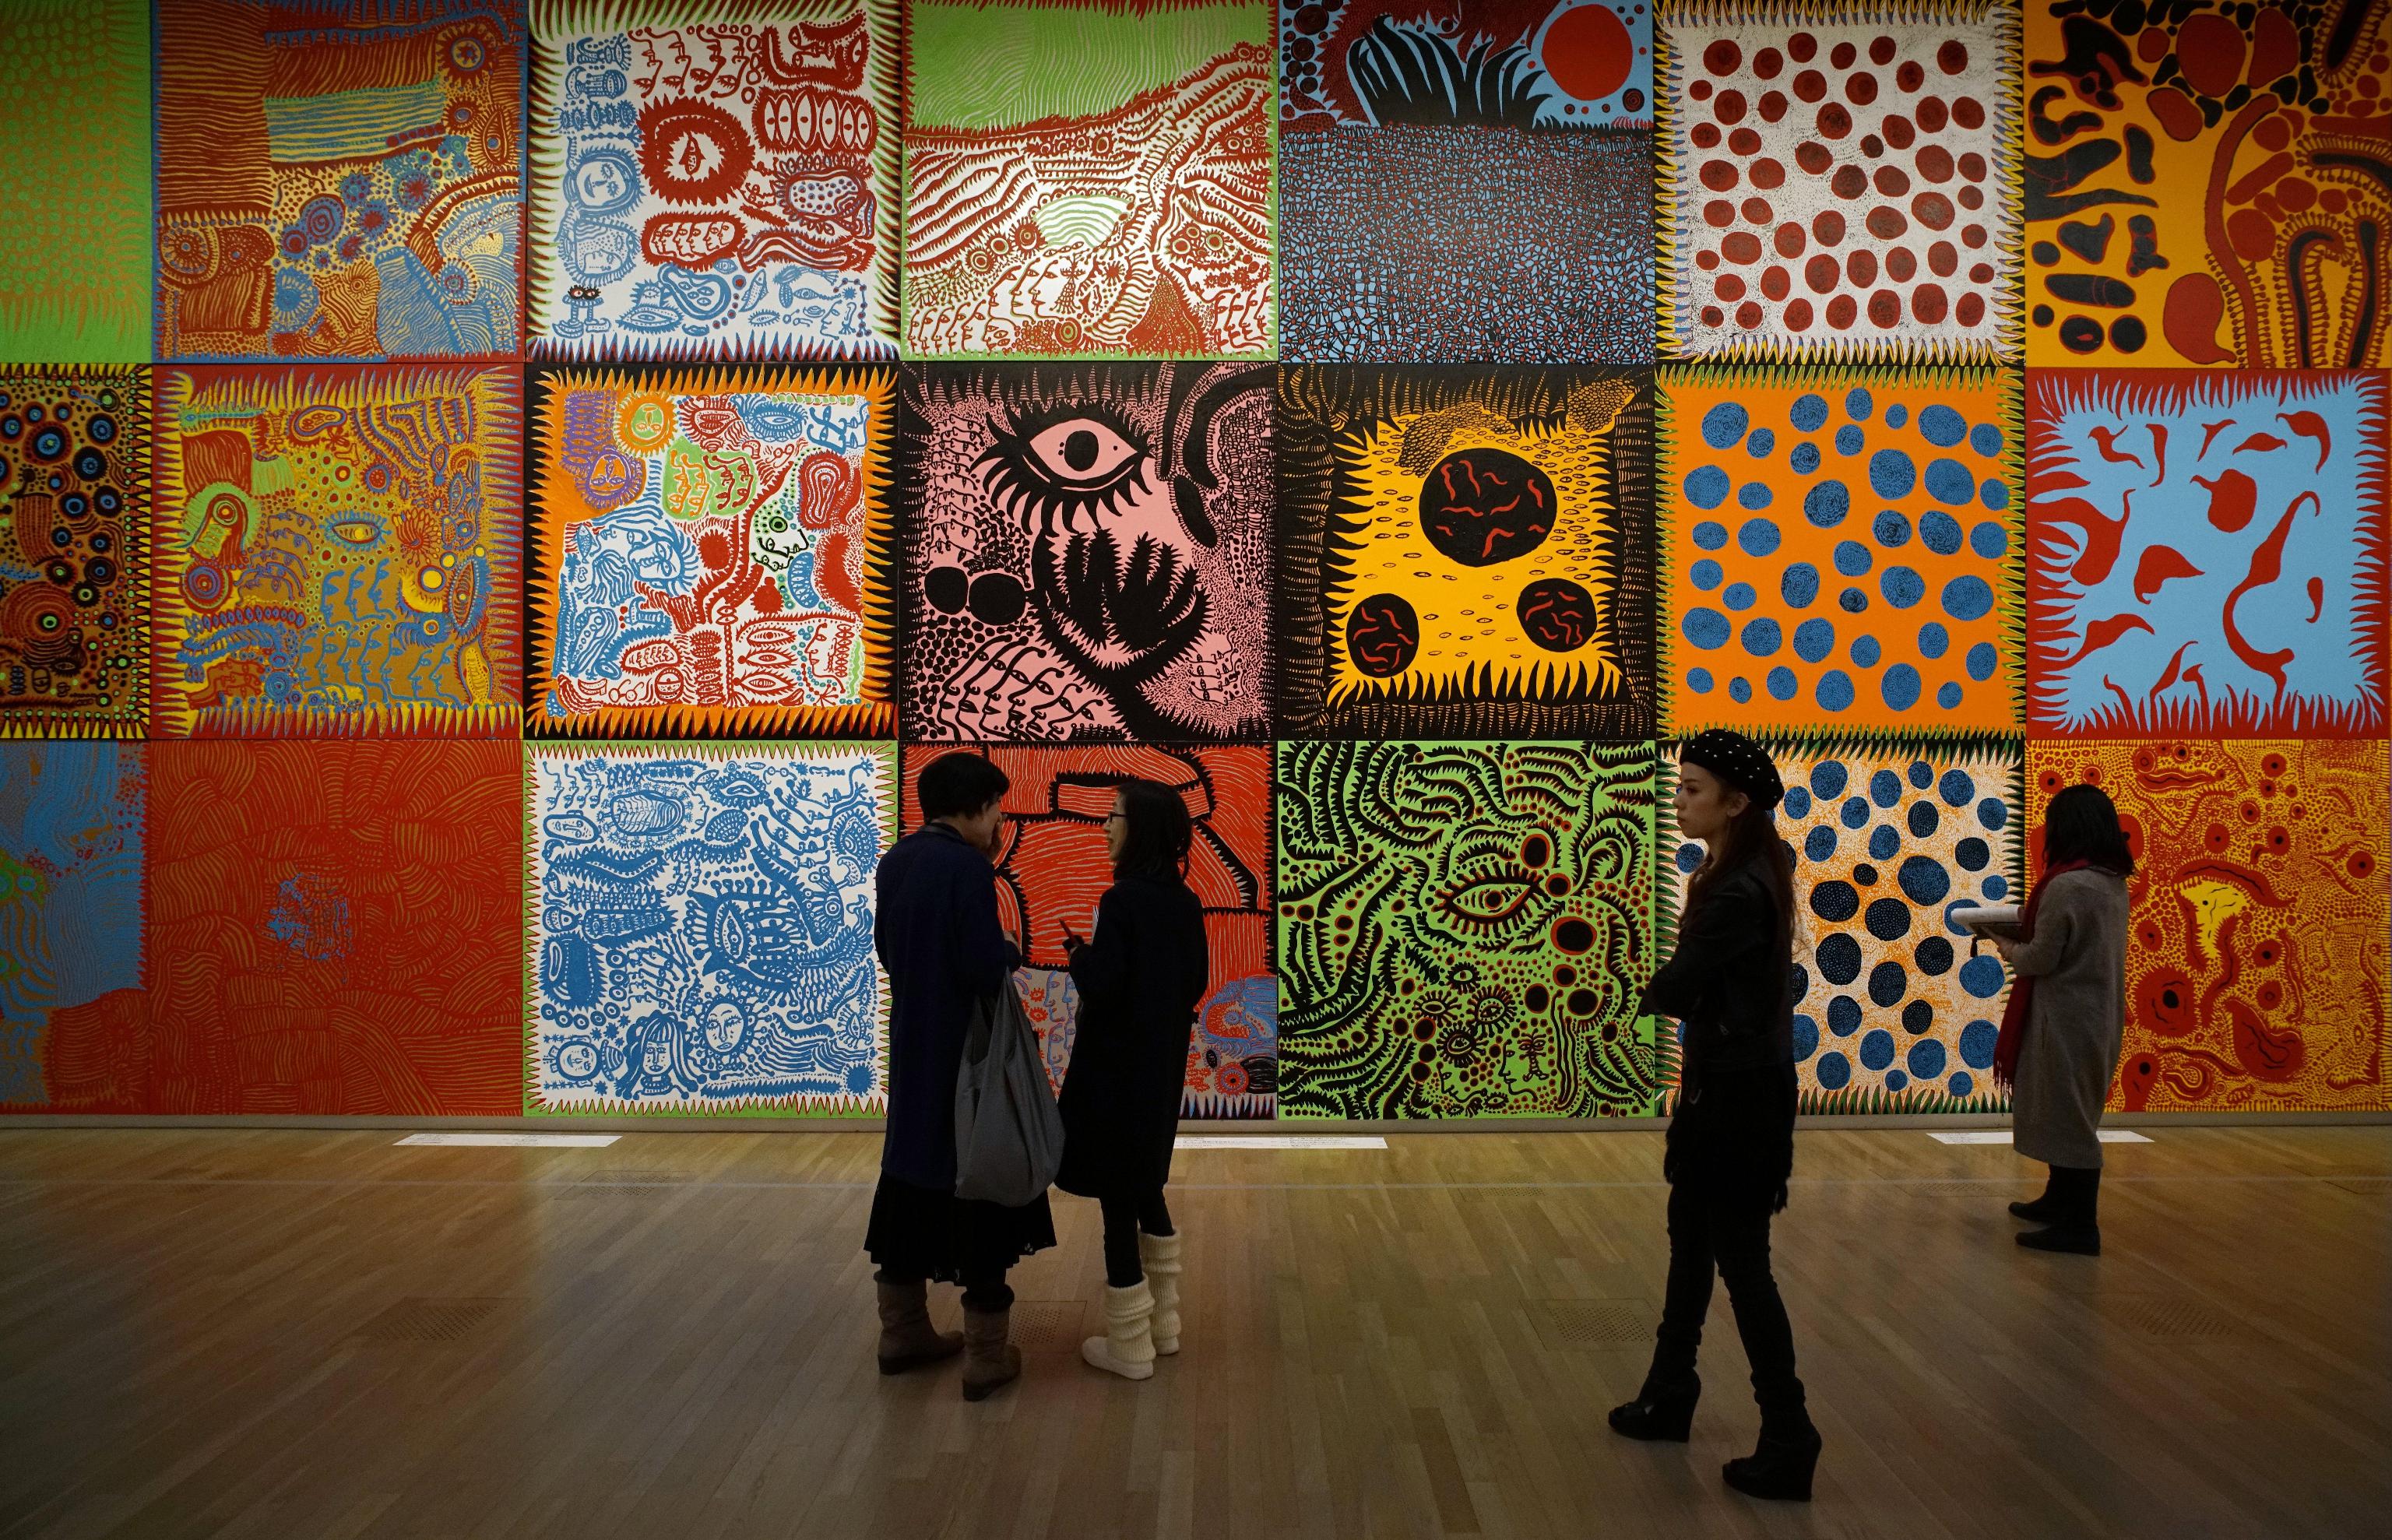 epa05806265 Visitors look at works by Japanese artist Yayoi Kusama during a media preview of the 'Yayoi Kusama: My Eternal Soul' exhibition at the National Art Center in Tokyo, Japan, 21 February 2017. The exhibition presents early and recent works by the 87-year-old artist and will be open to the public from 22 February to 22 May 2017.  EPA/FRANCK ROBICHON   EDITORIAL USE ONLY